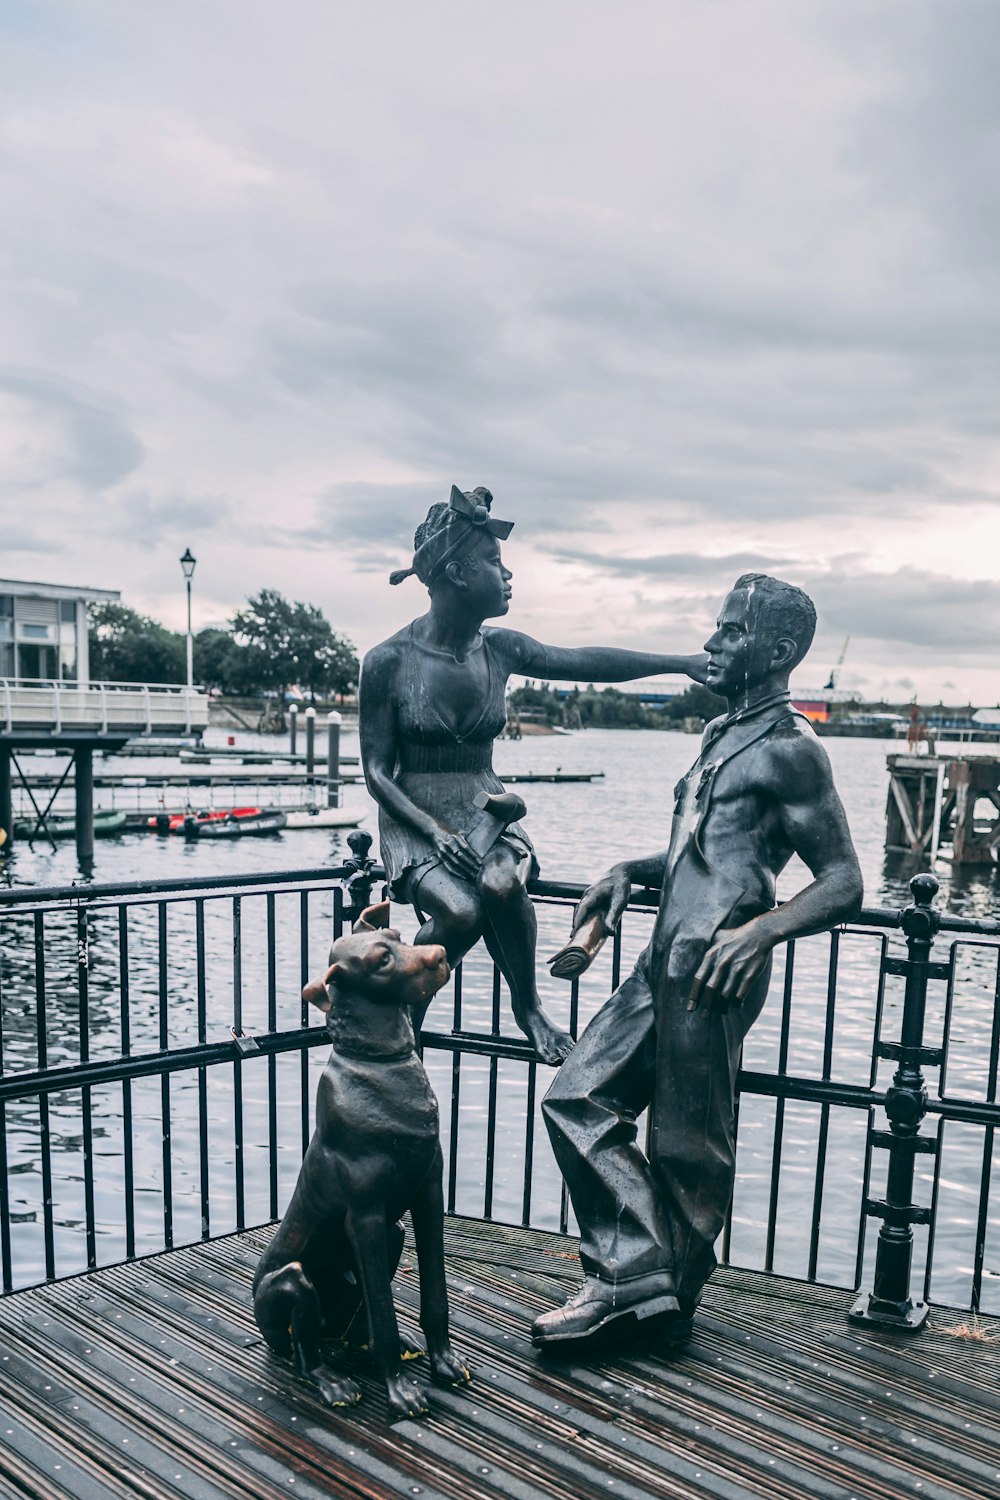 a statue of a person and a dog by a body of water